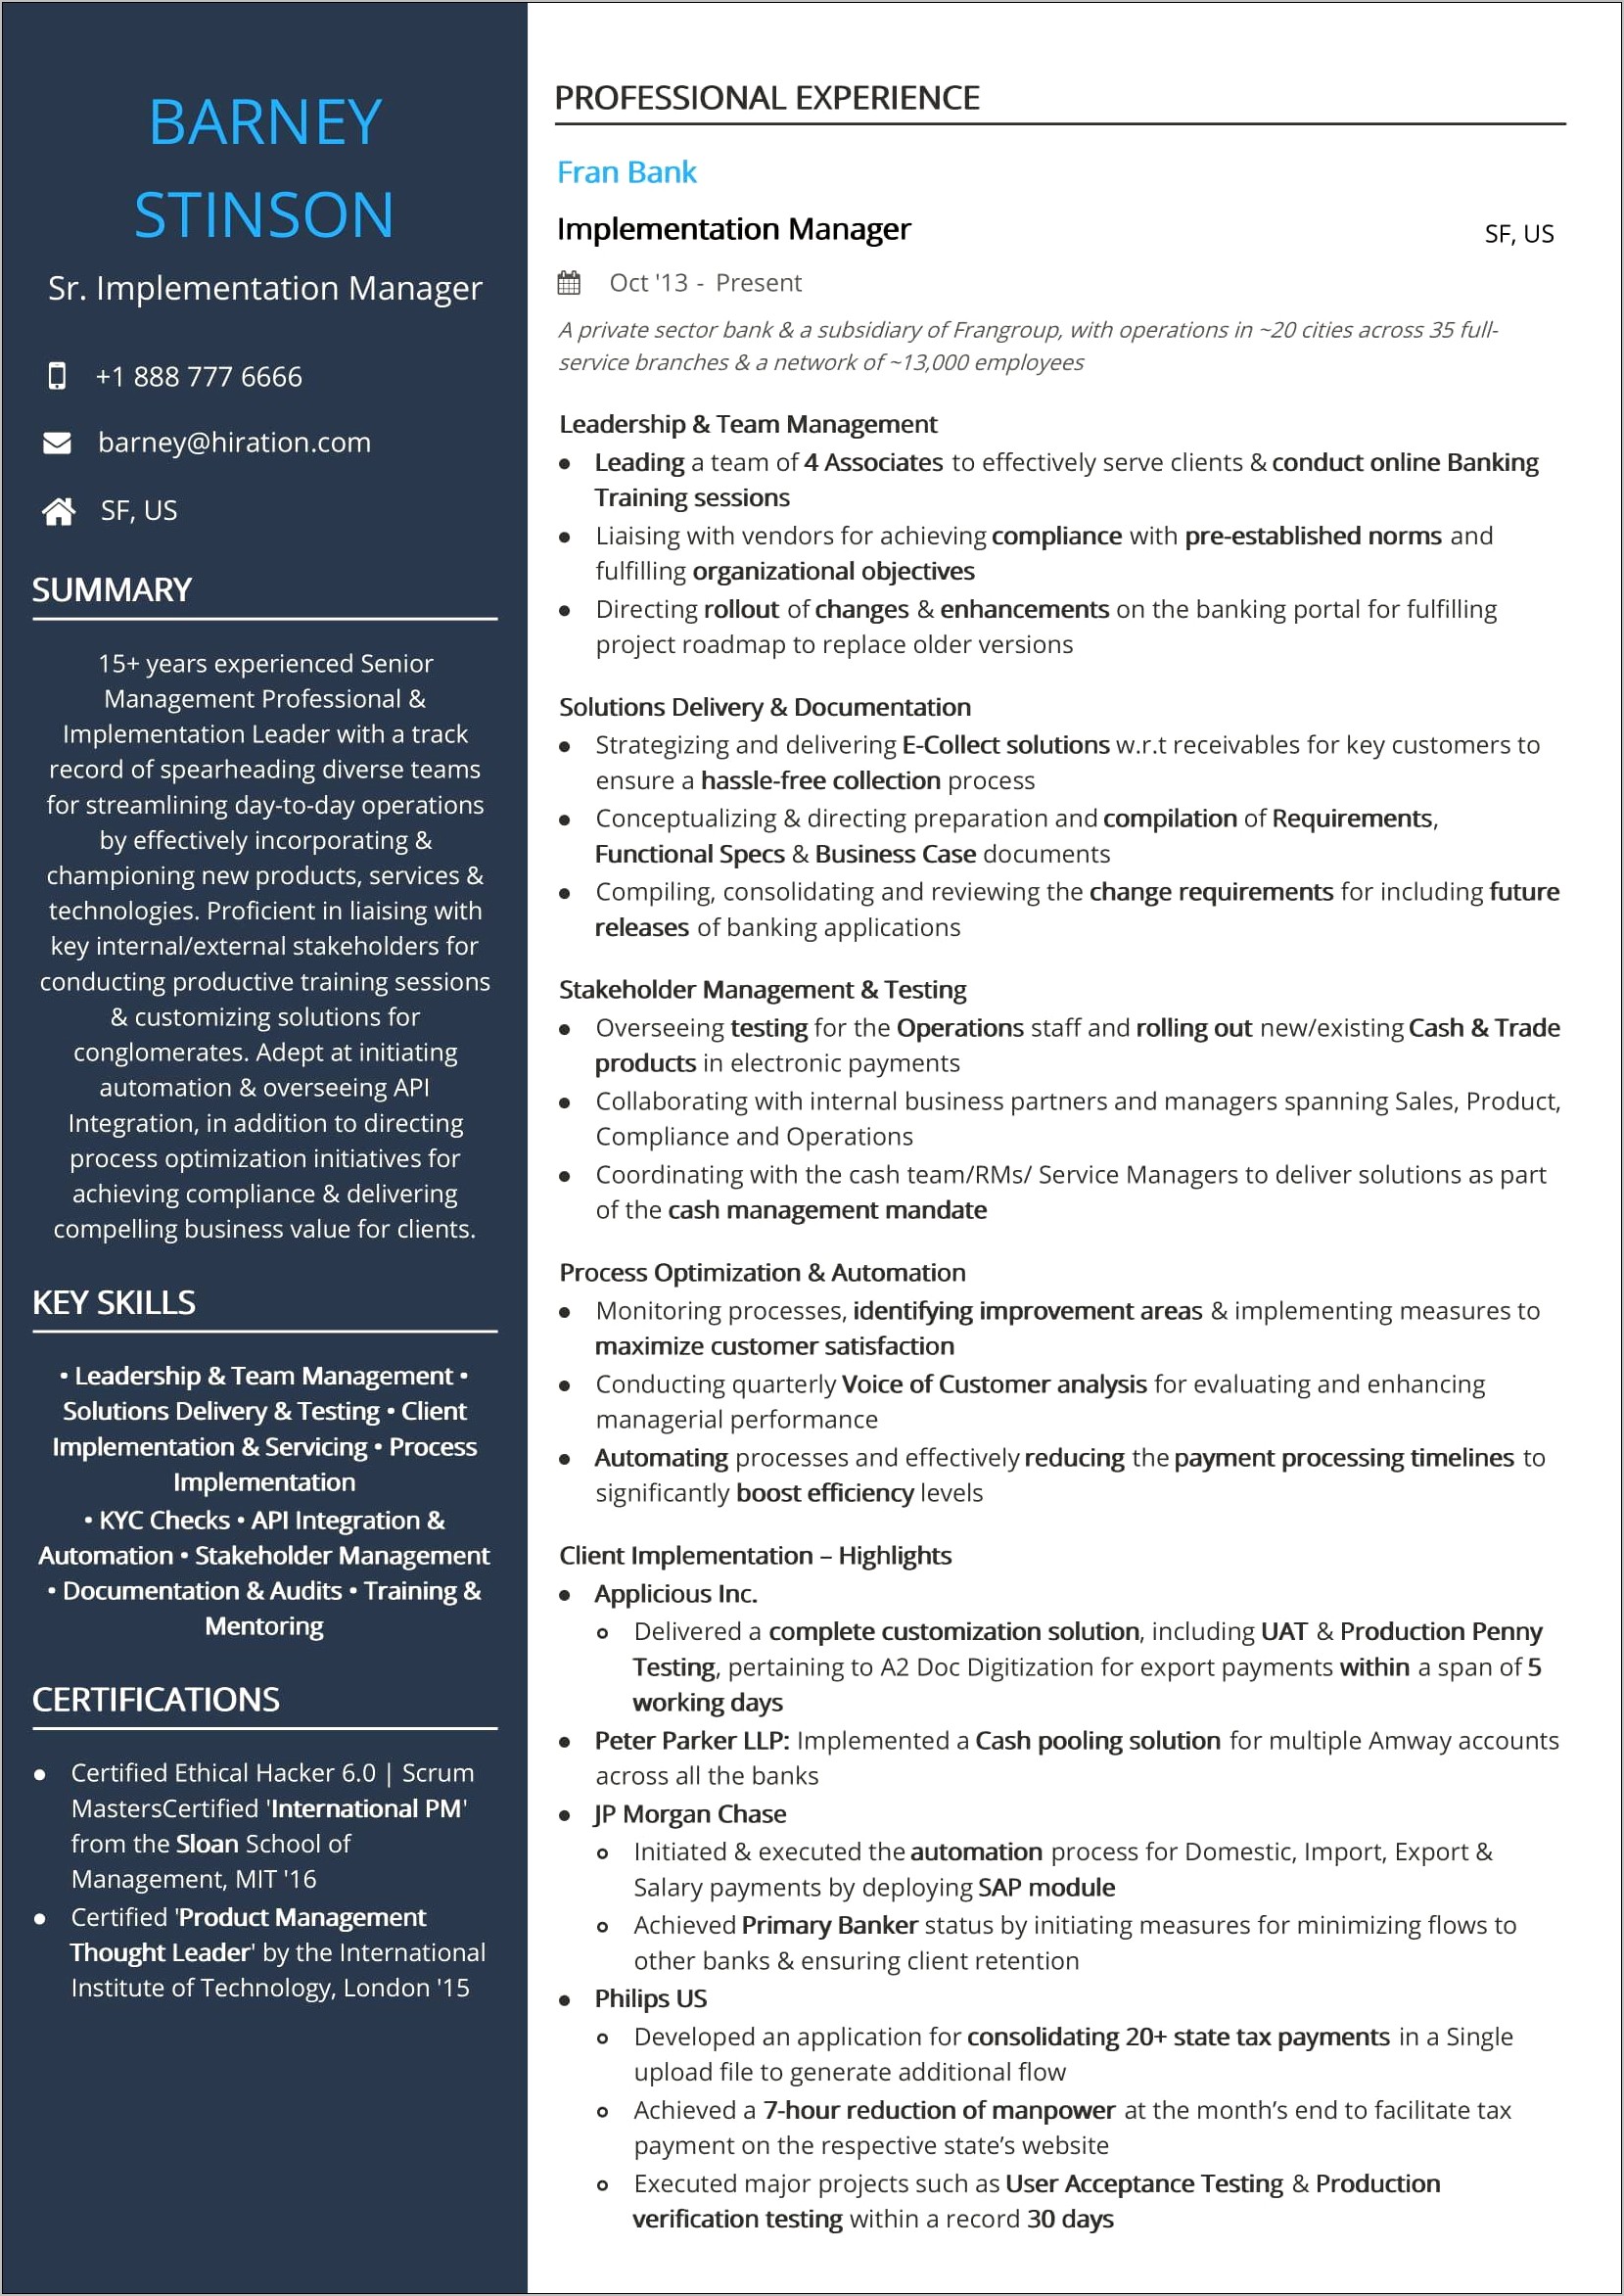 Resume Examples For Compliance Officer College